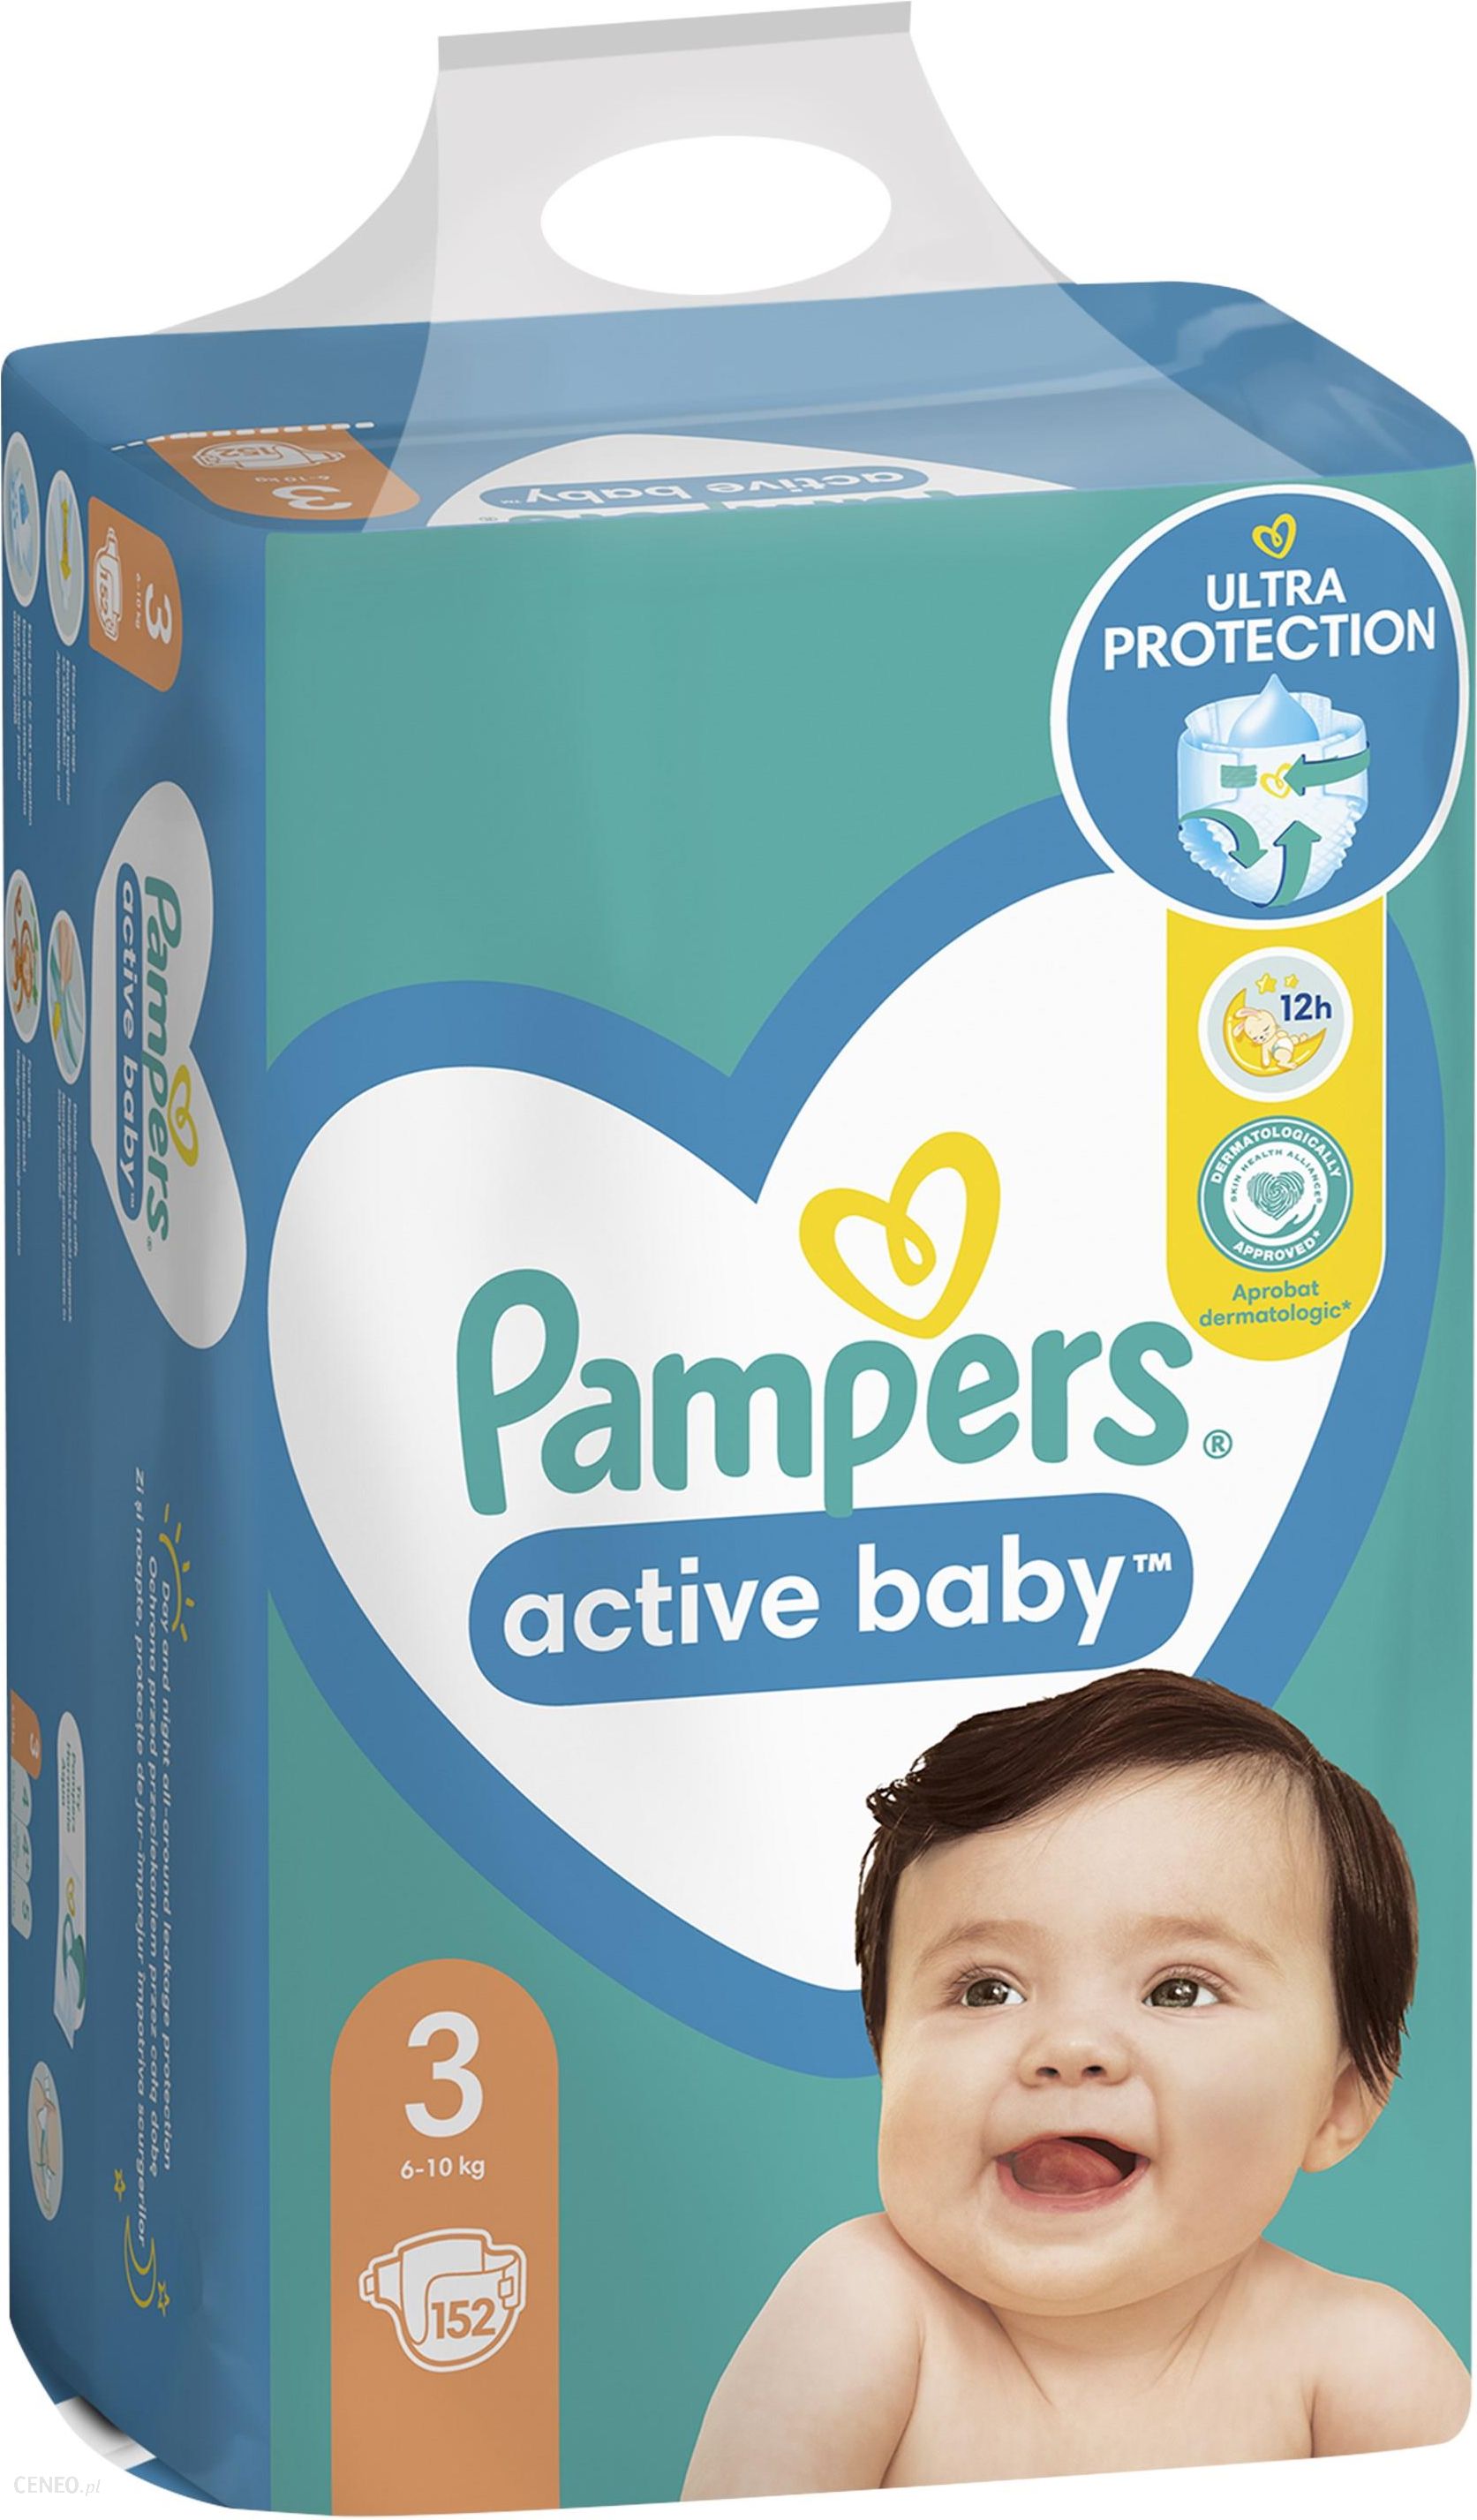 pampers diapers stock price